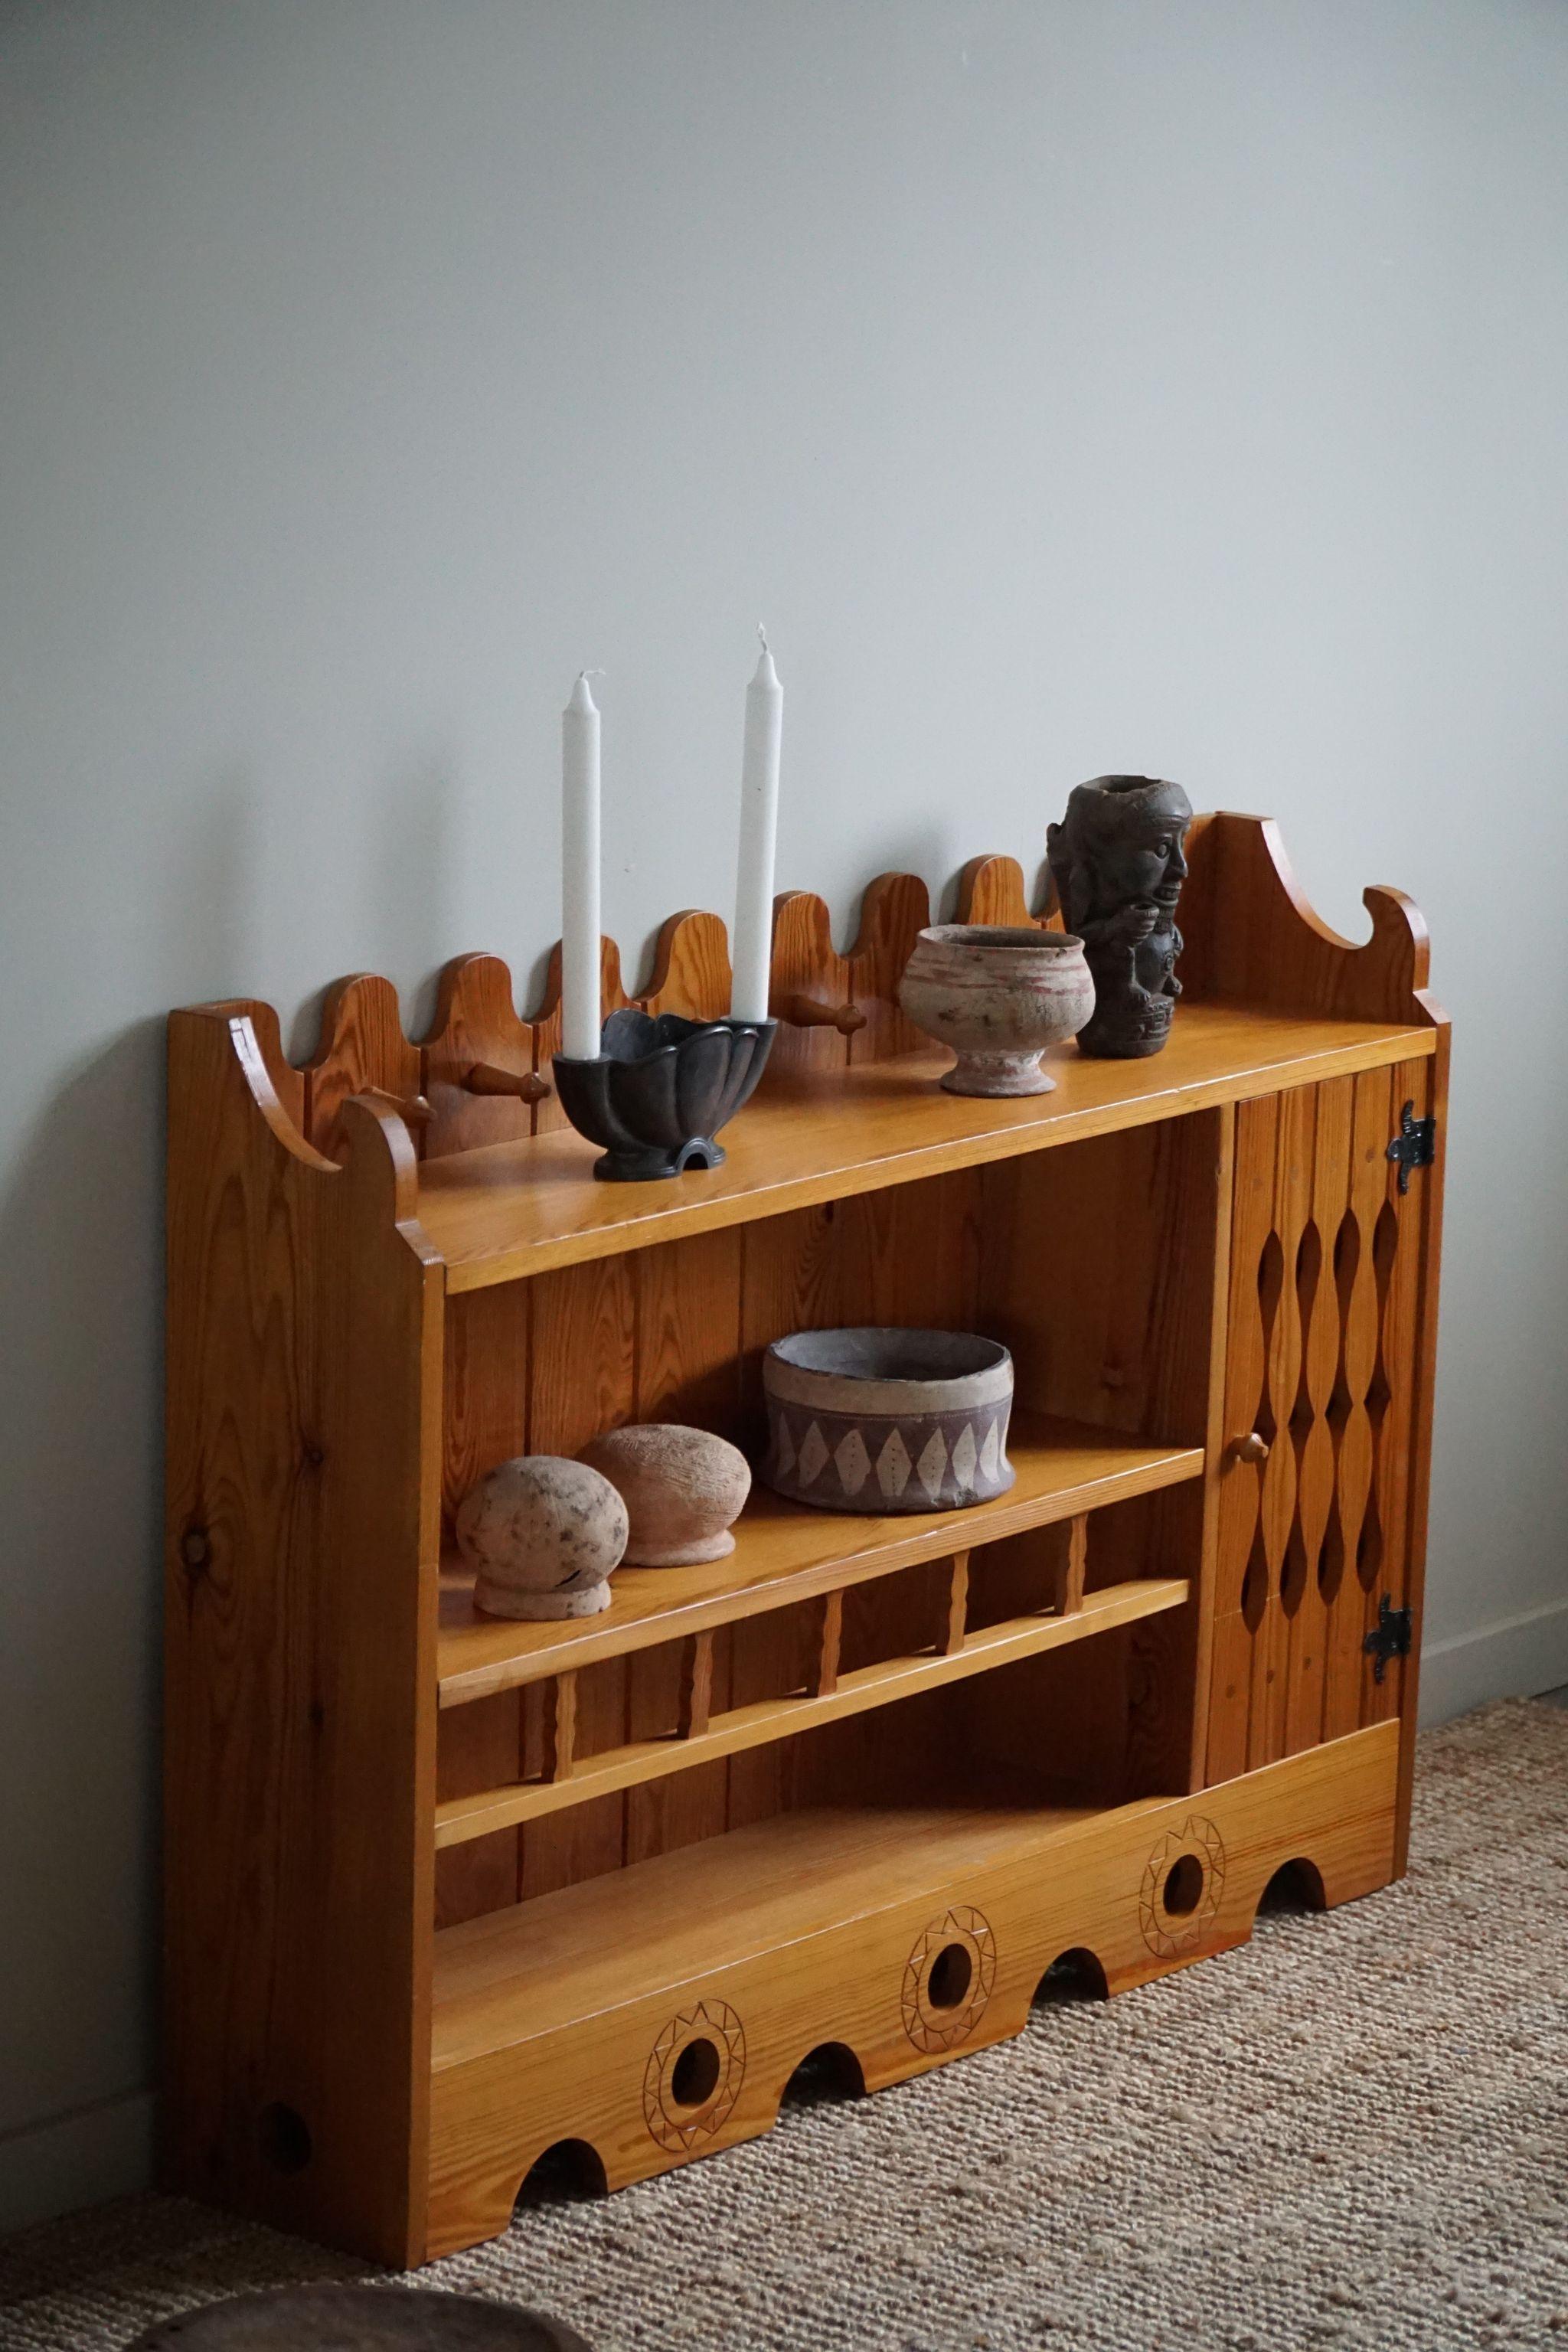 Hand-Crafted Swedish Folk Art Pine Shelf, In the style of Axel Einar Hjorth, 1930s For Sale